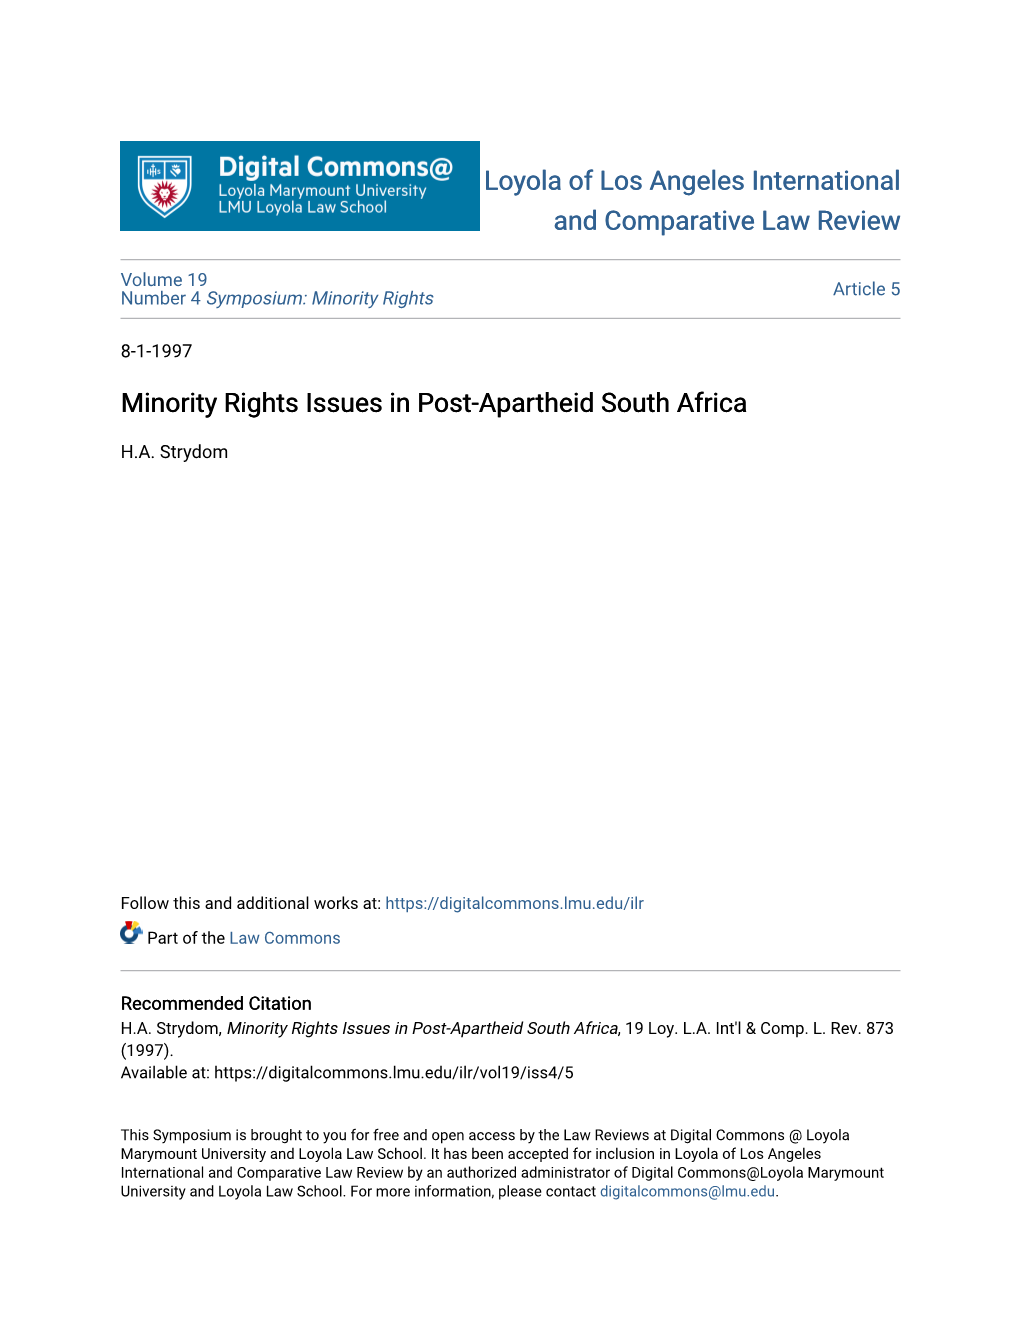 Minority Rights Issues in Post-Apartheid South Africa